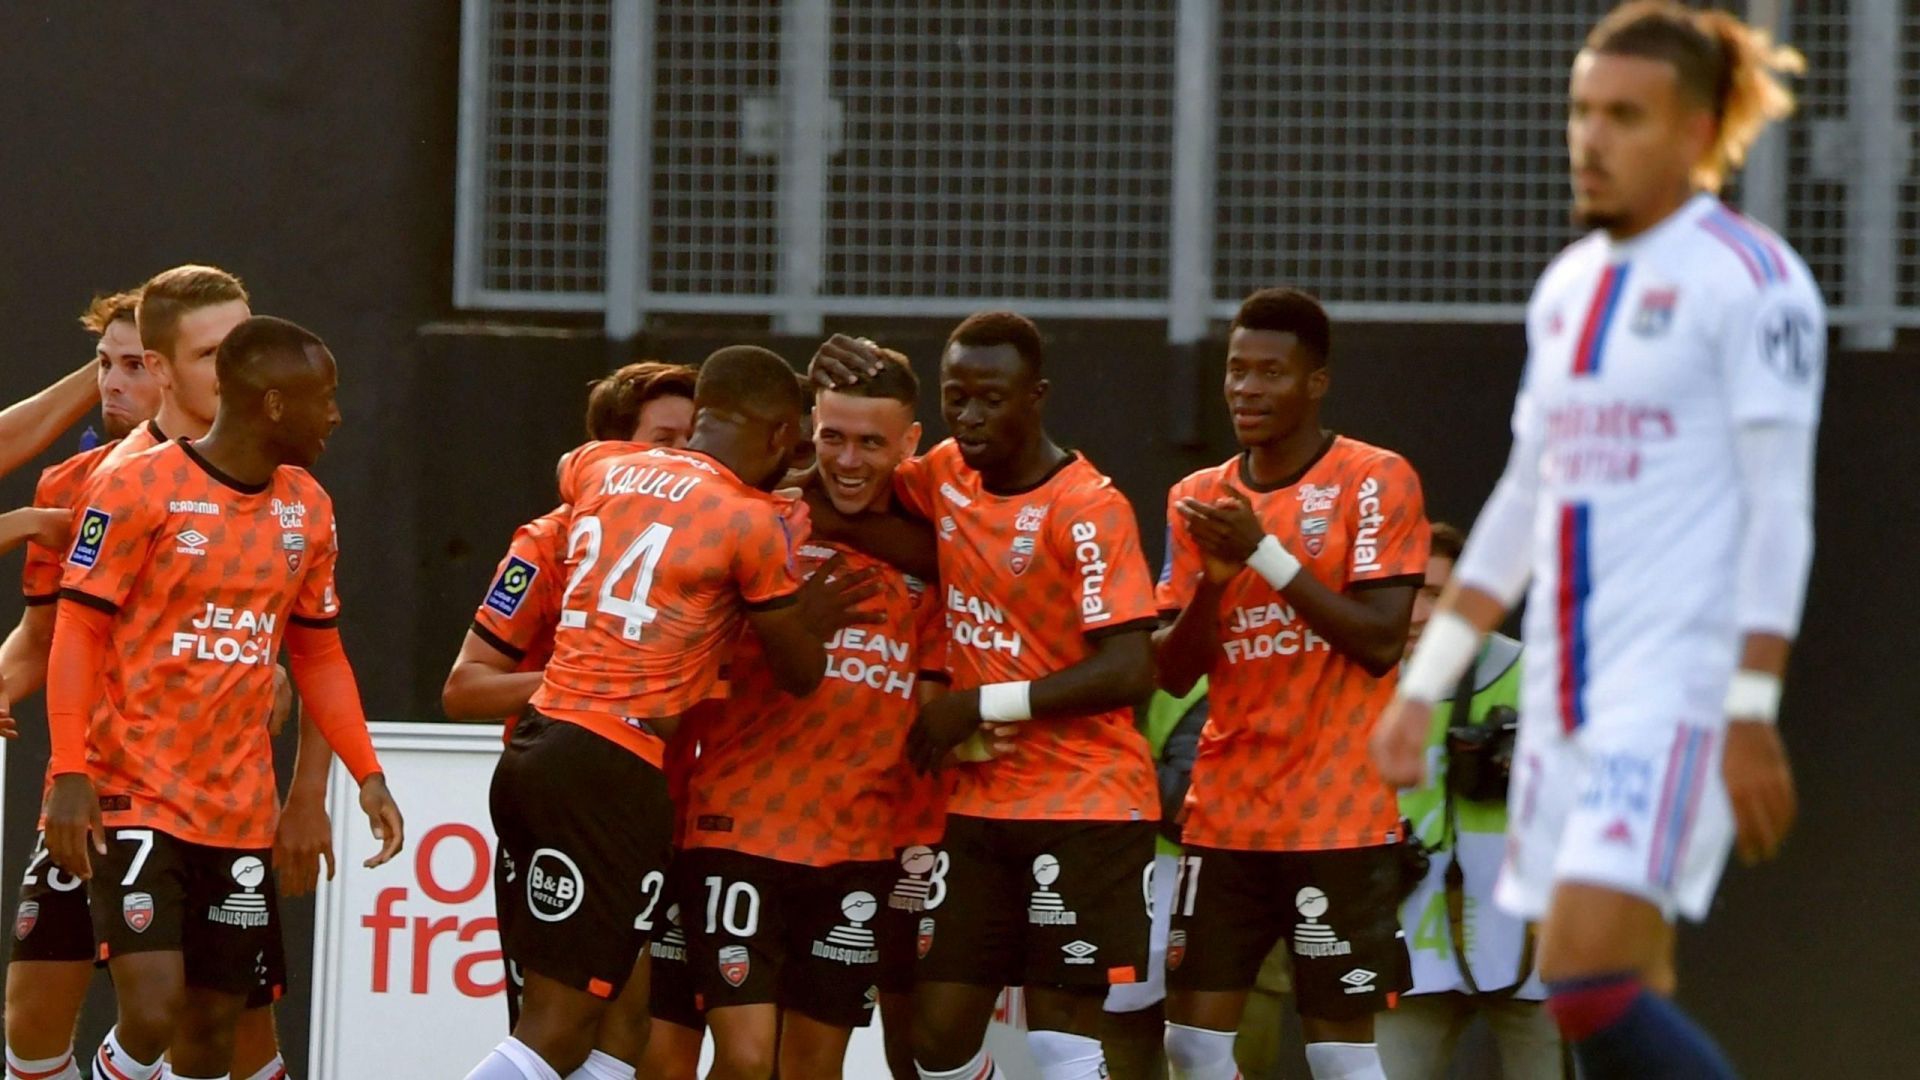 Can Lorient follow their impressive win over Lyon with a victory over Nantes this weekend?